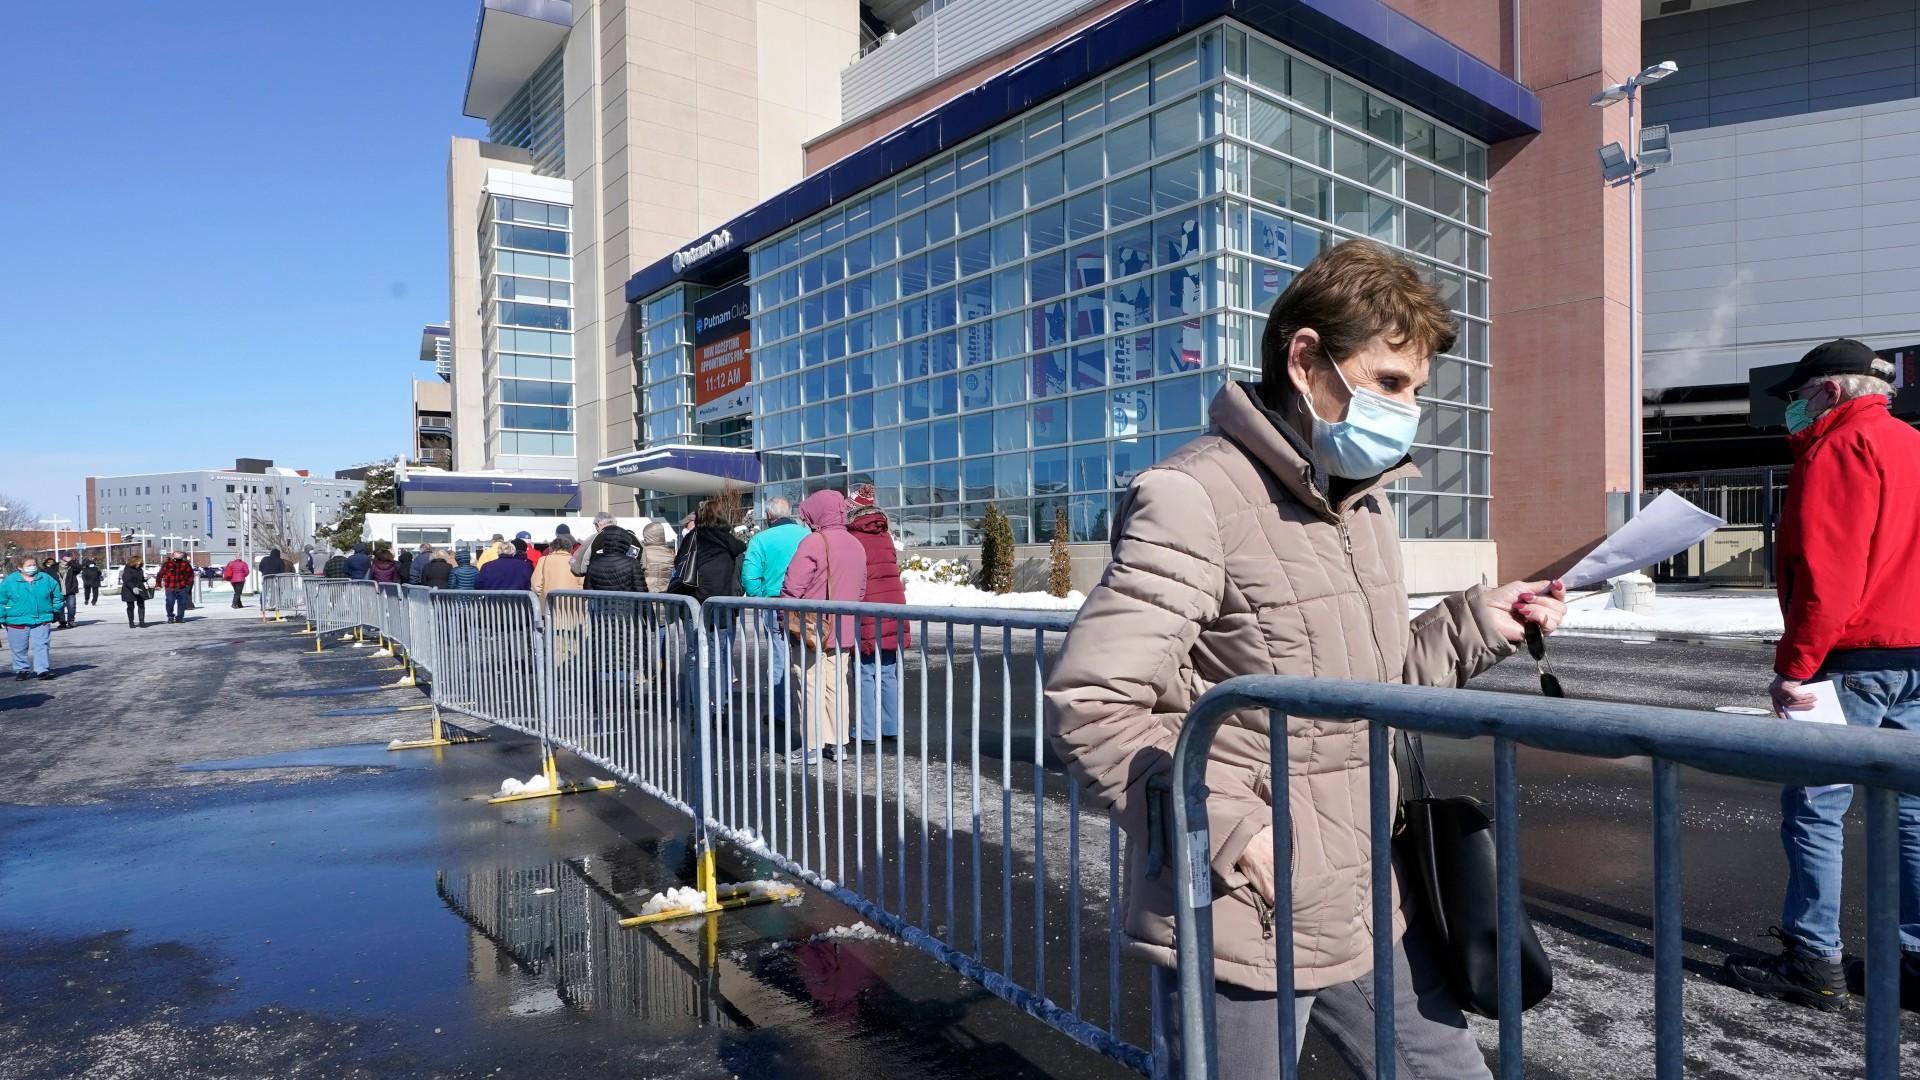 People enter a socially distanced line to get their COVID-19 vaccinations at Gillette Stadium, Monday, Feb. 8, 2021, in Foxborough, Mass. (AP Photo / Steven Senne)